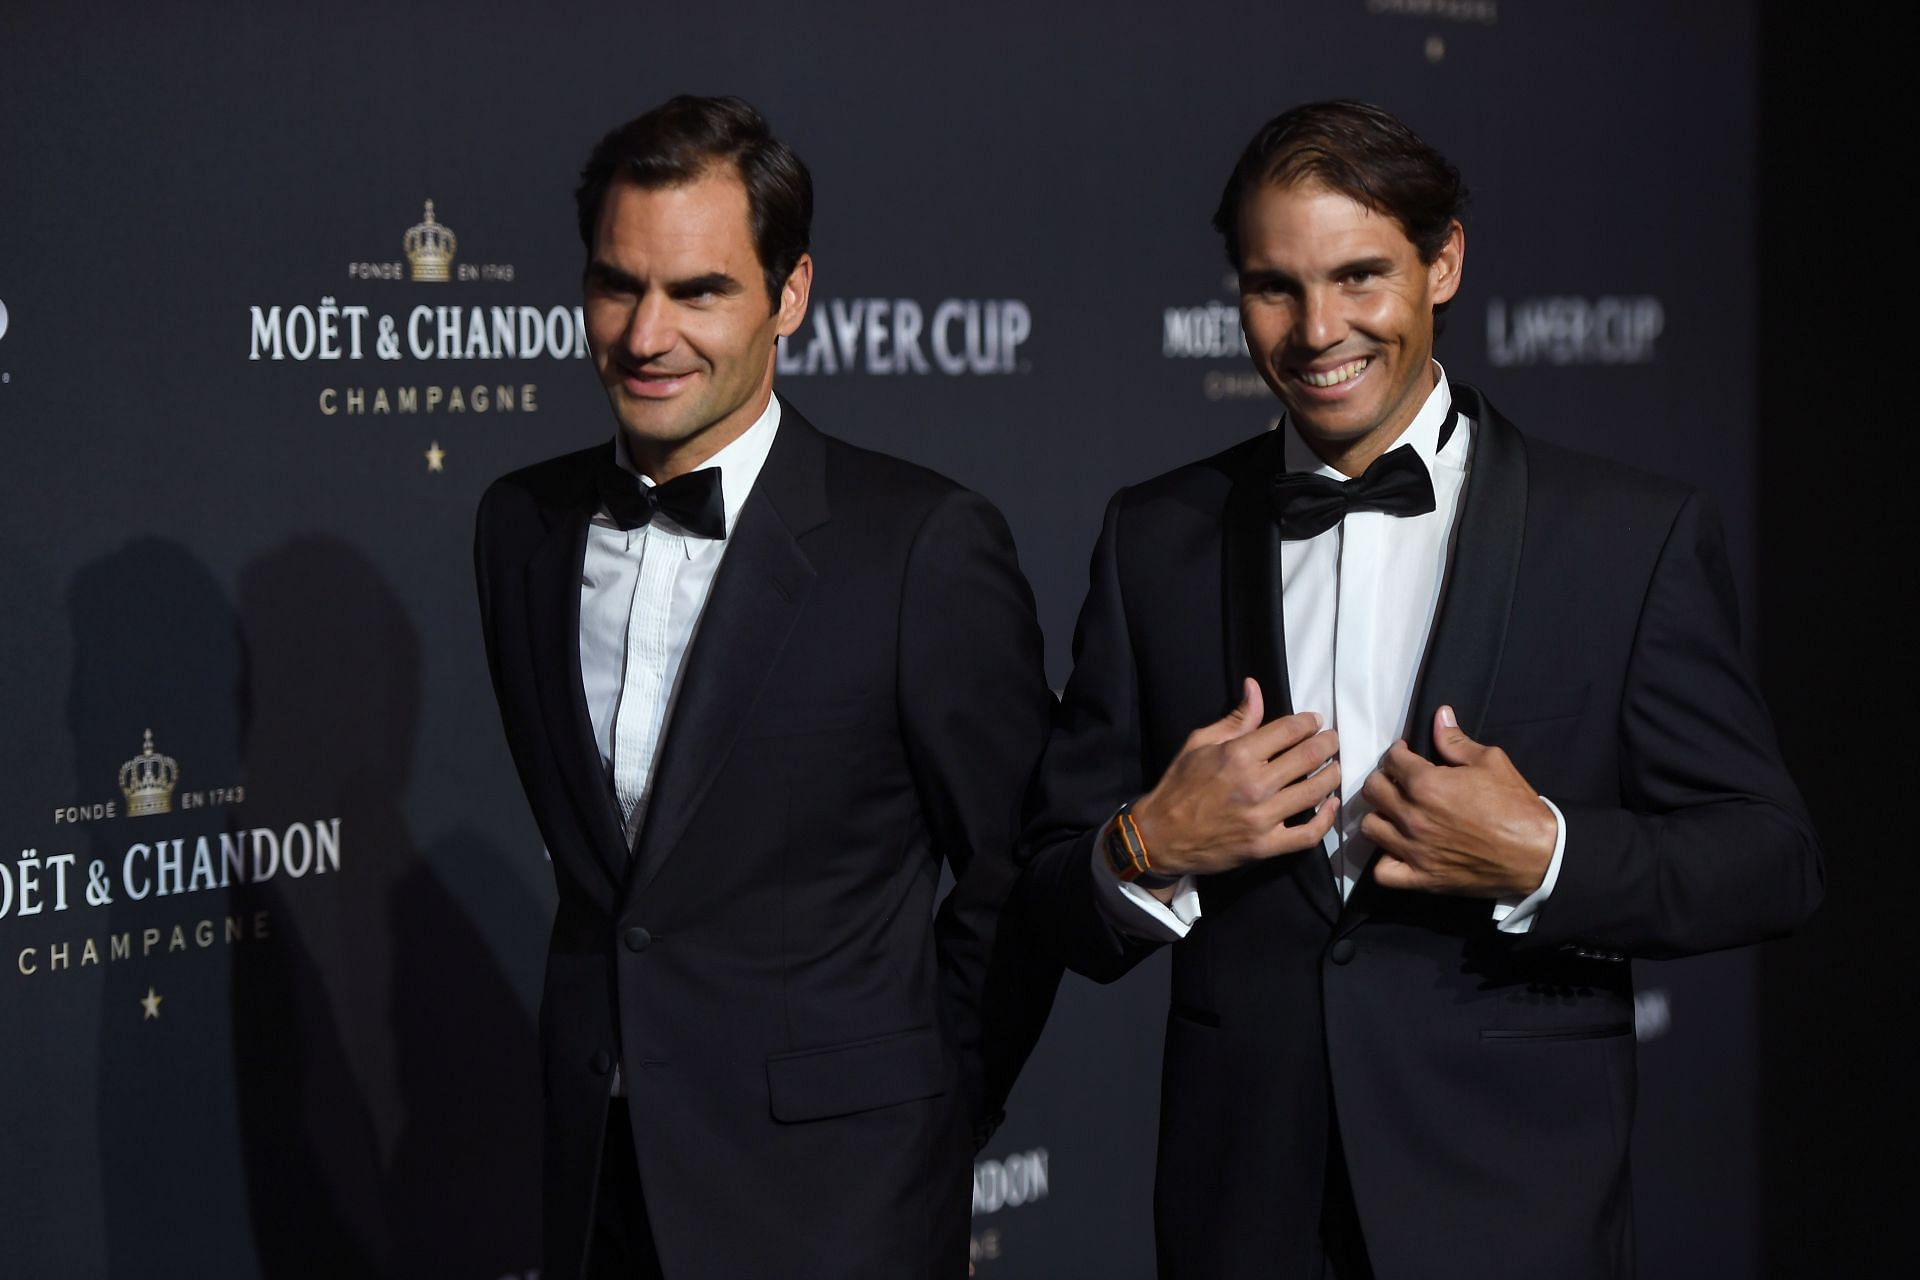 Roger Federer/Rafael Nadal vs Jack Sock/Frances Tiafoe Where to watch, TV schedule, live streaming details and more Laver Cup 2022